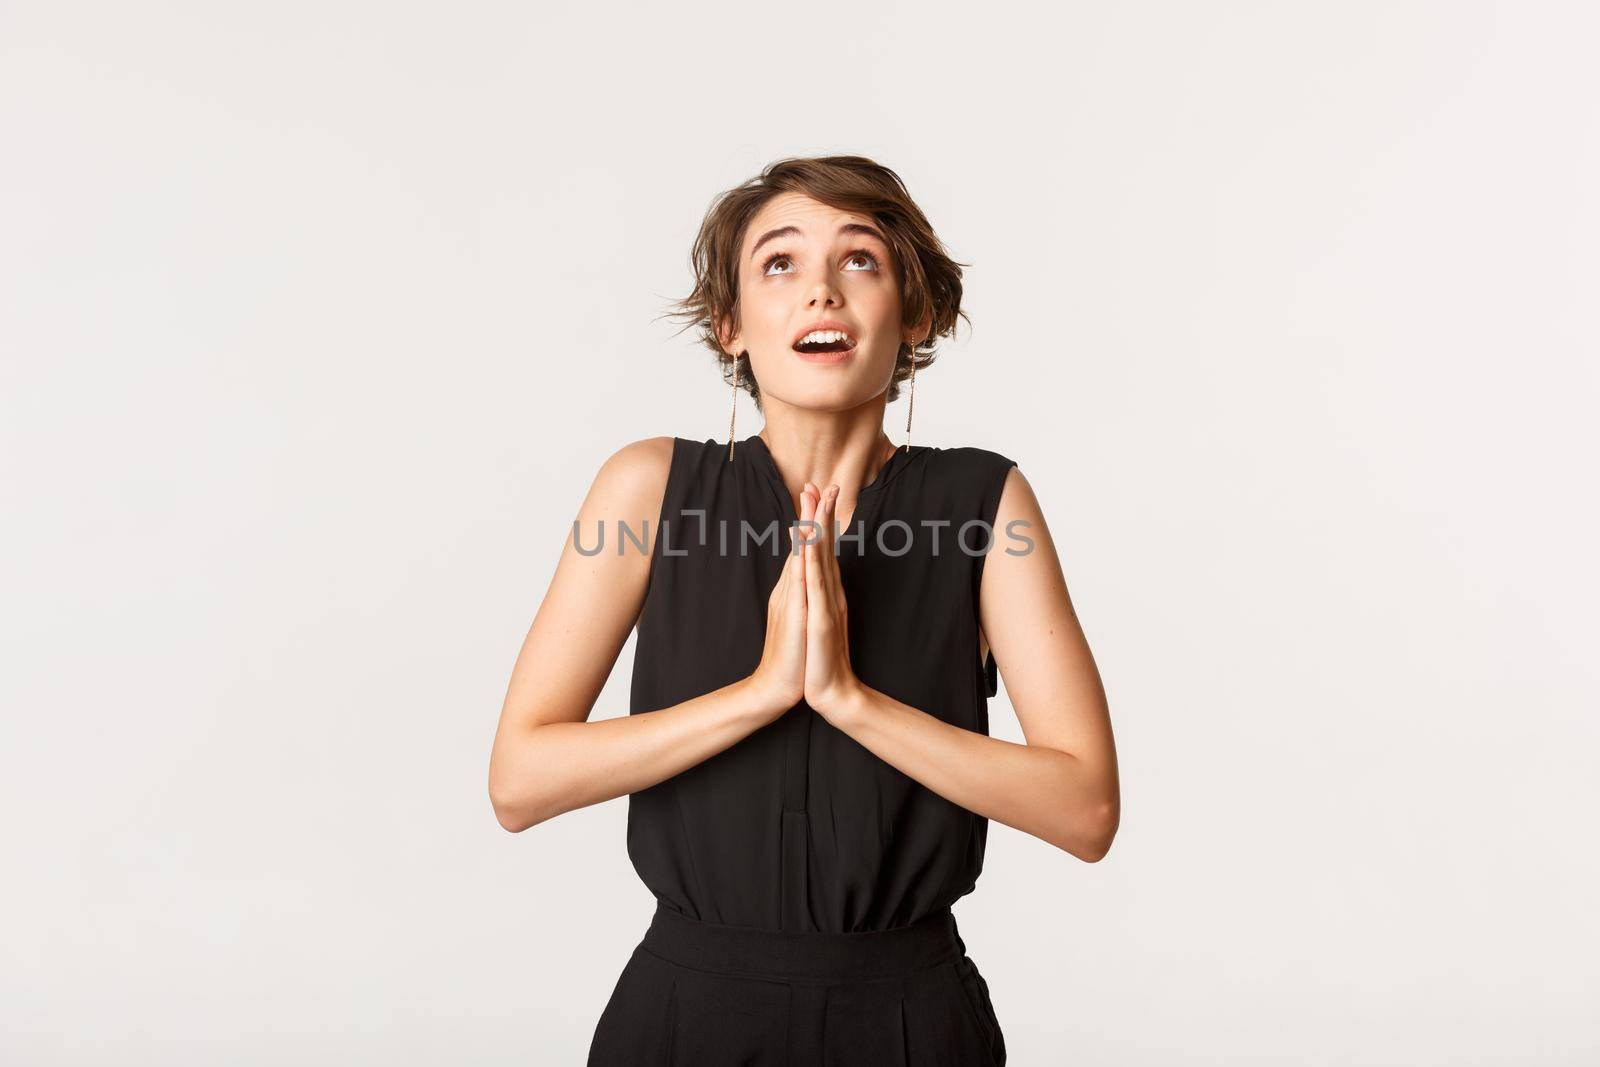 Image of hopeful praying girl clasp hands together and looking up, pleading to God, standing white background.